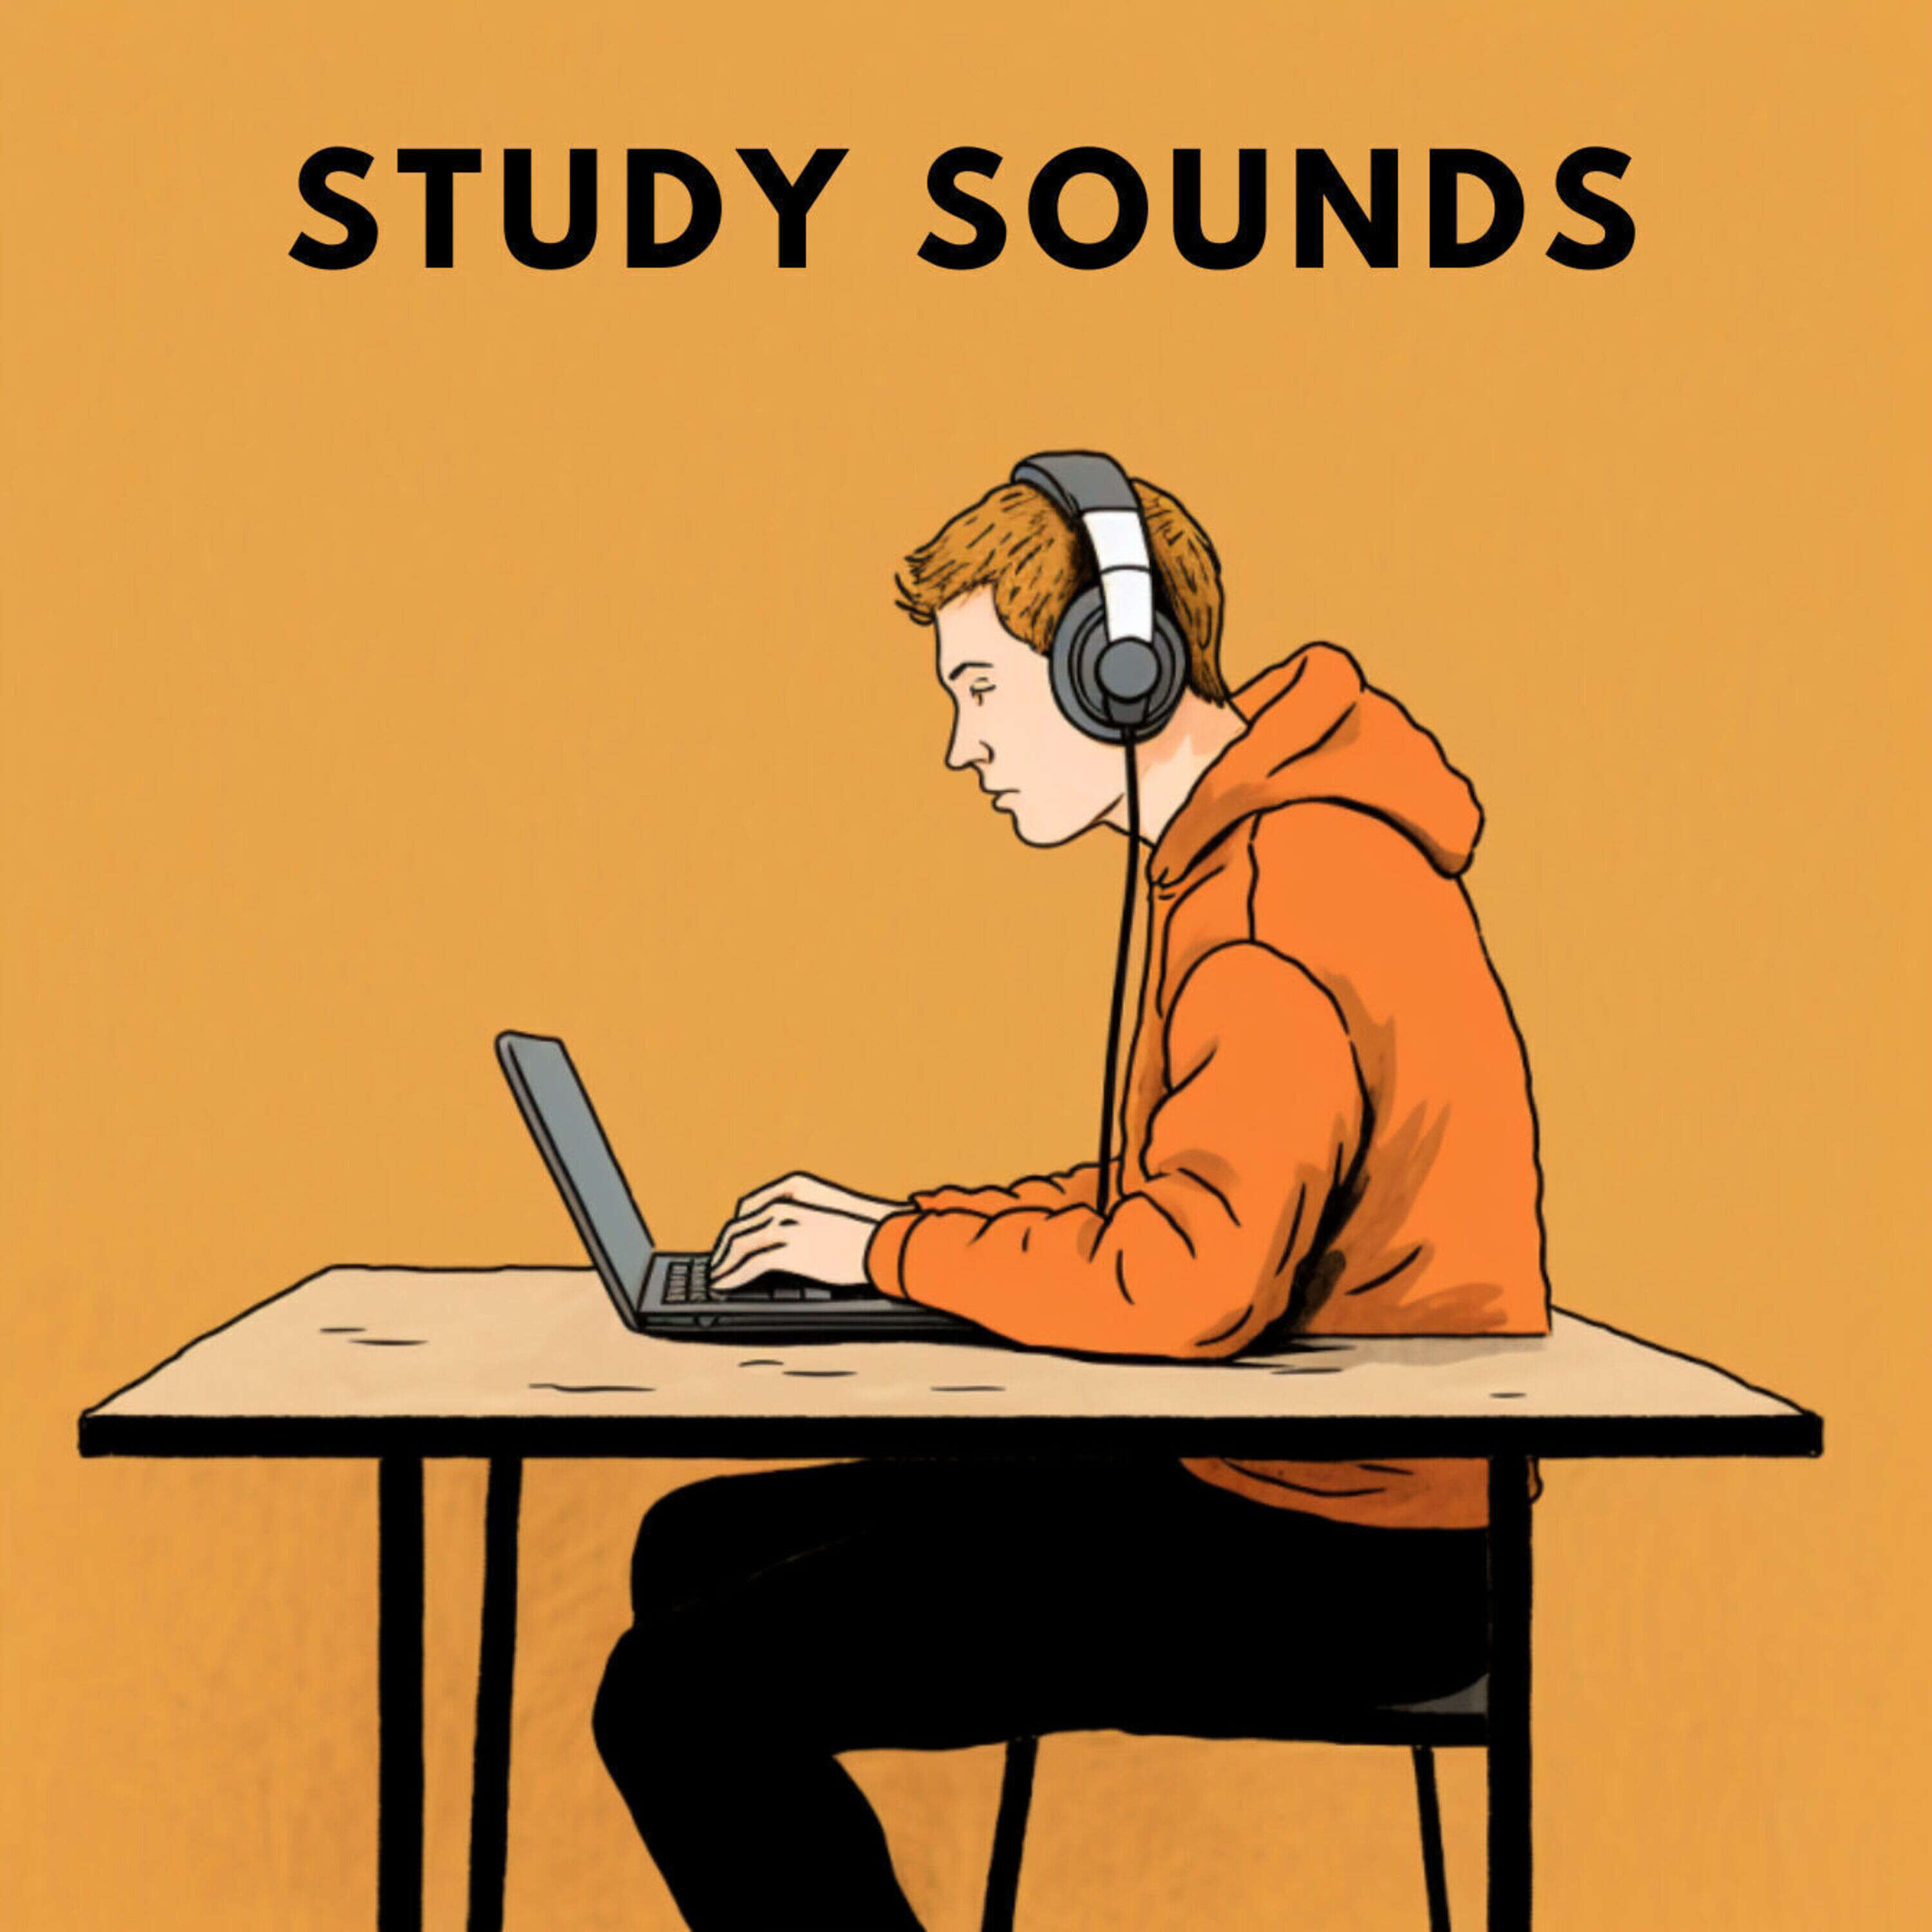 Upbeat Study sounds for Concentration - Peak Focus Isochronic Tones